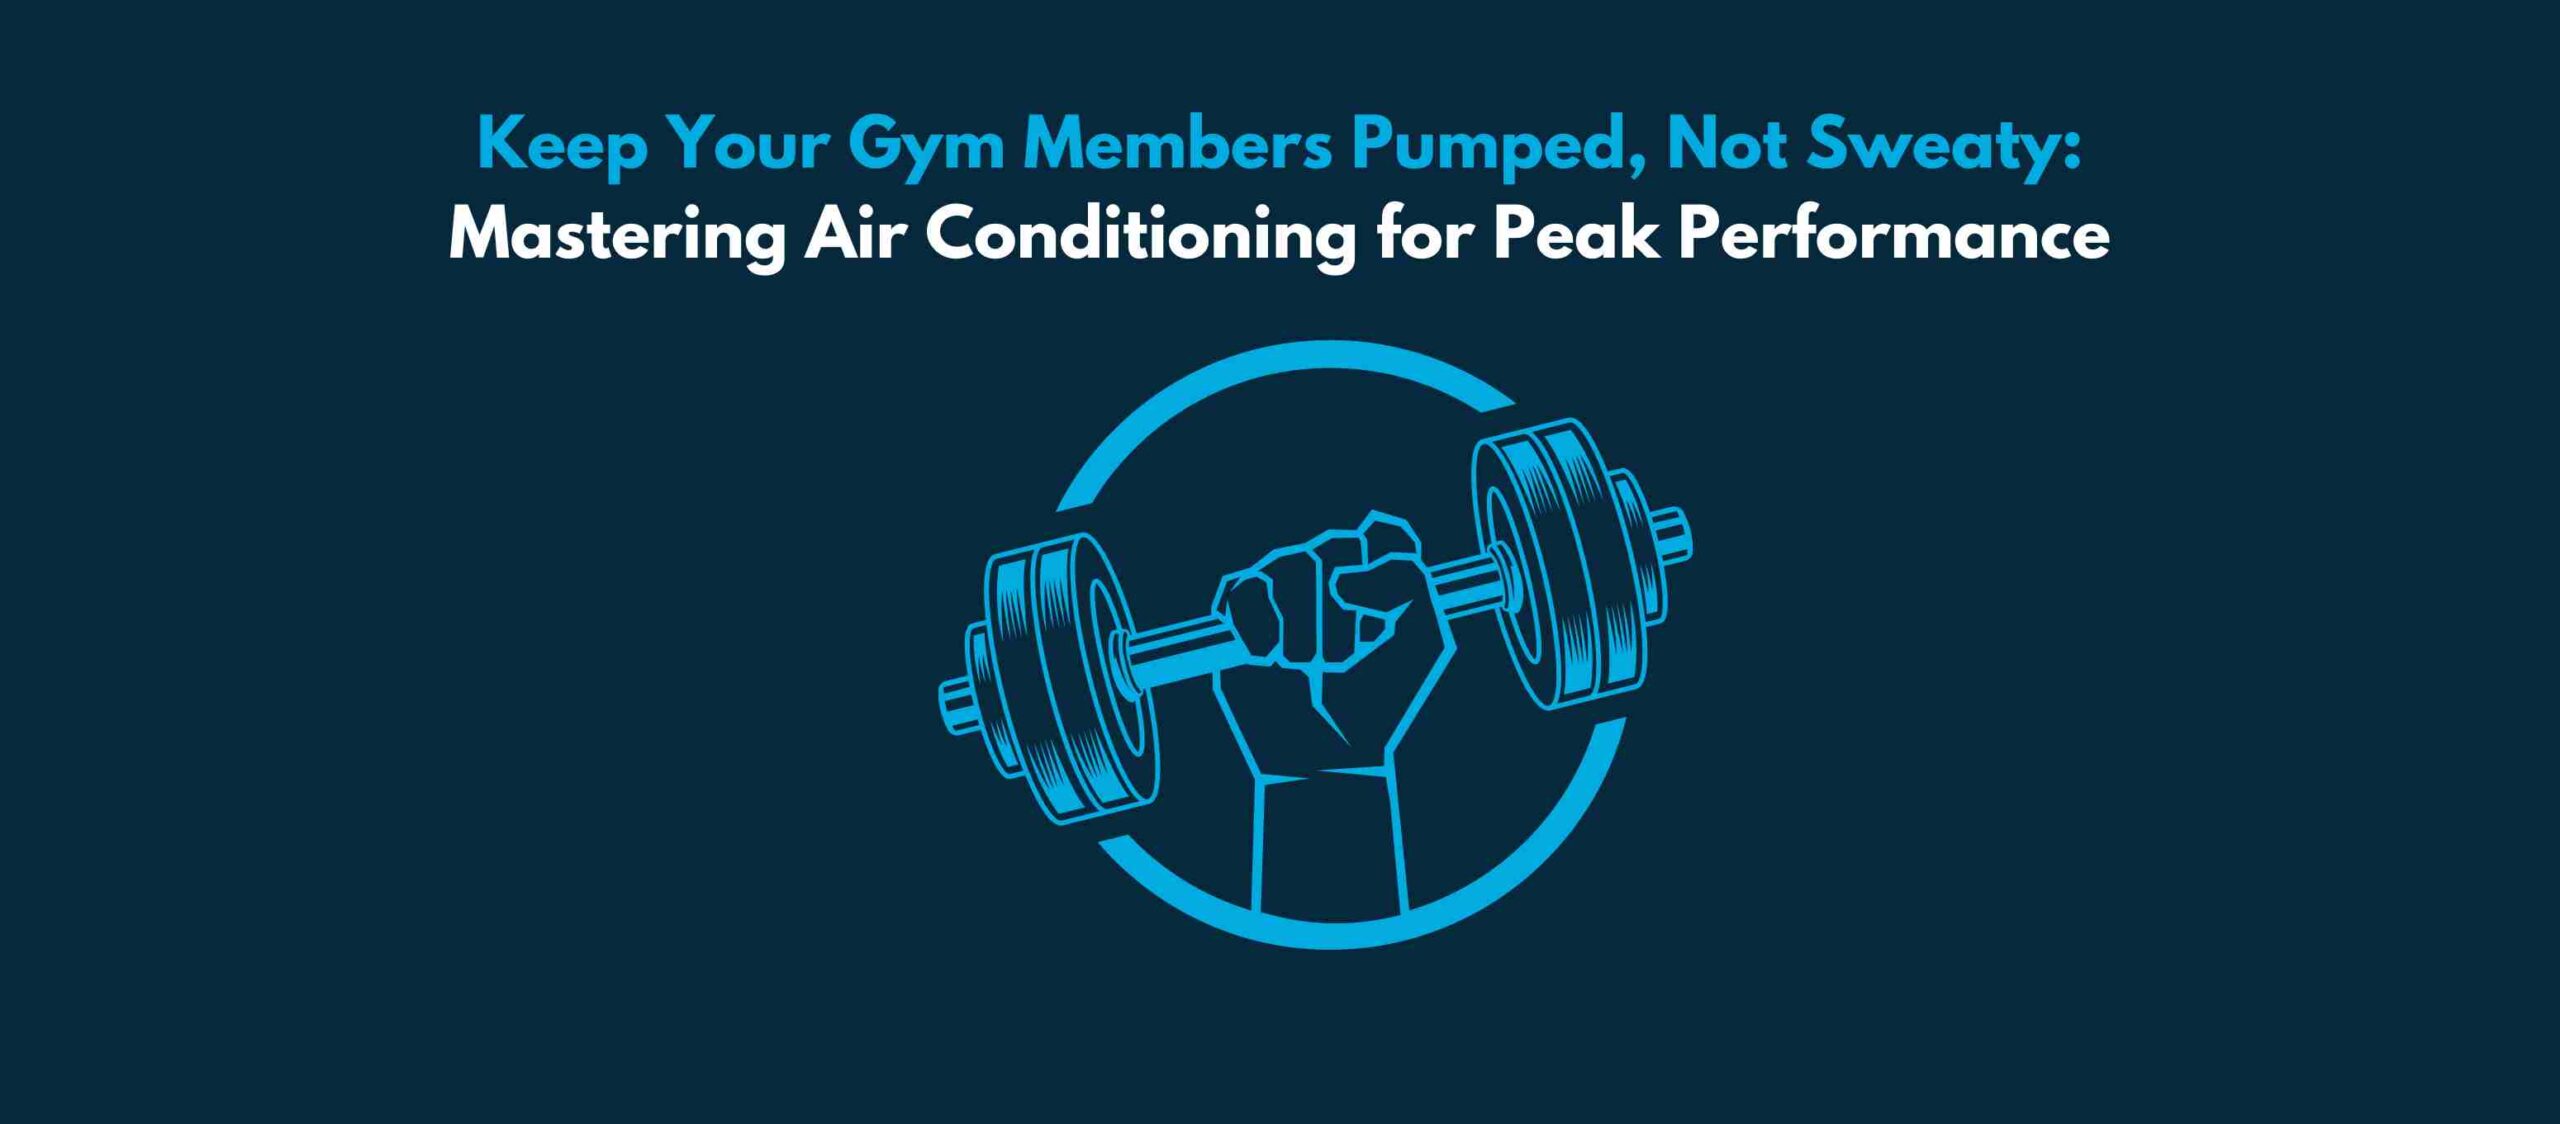 Keep Your Gym Members Pumped, Not Sweaty: Mastering Air Conditioning for Peak Performance